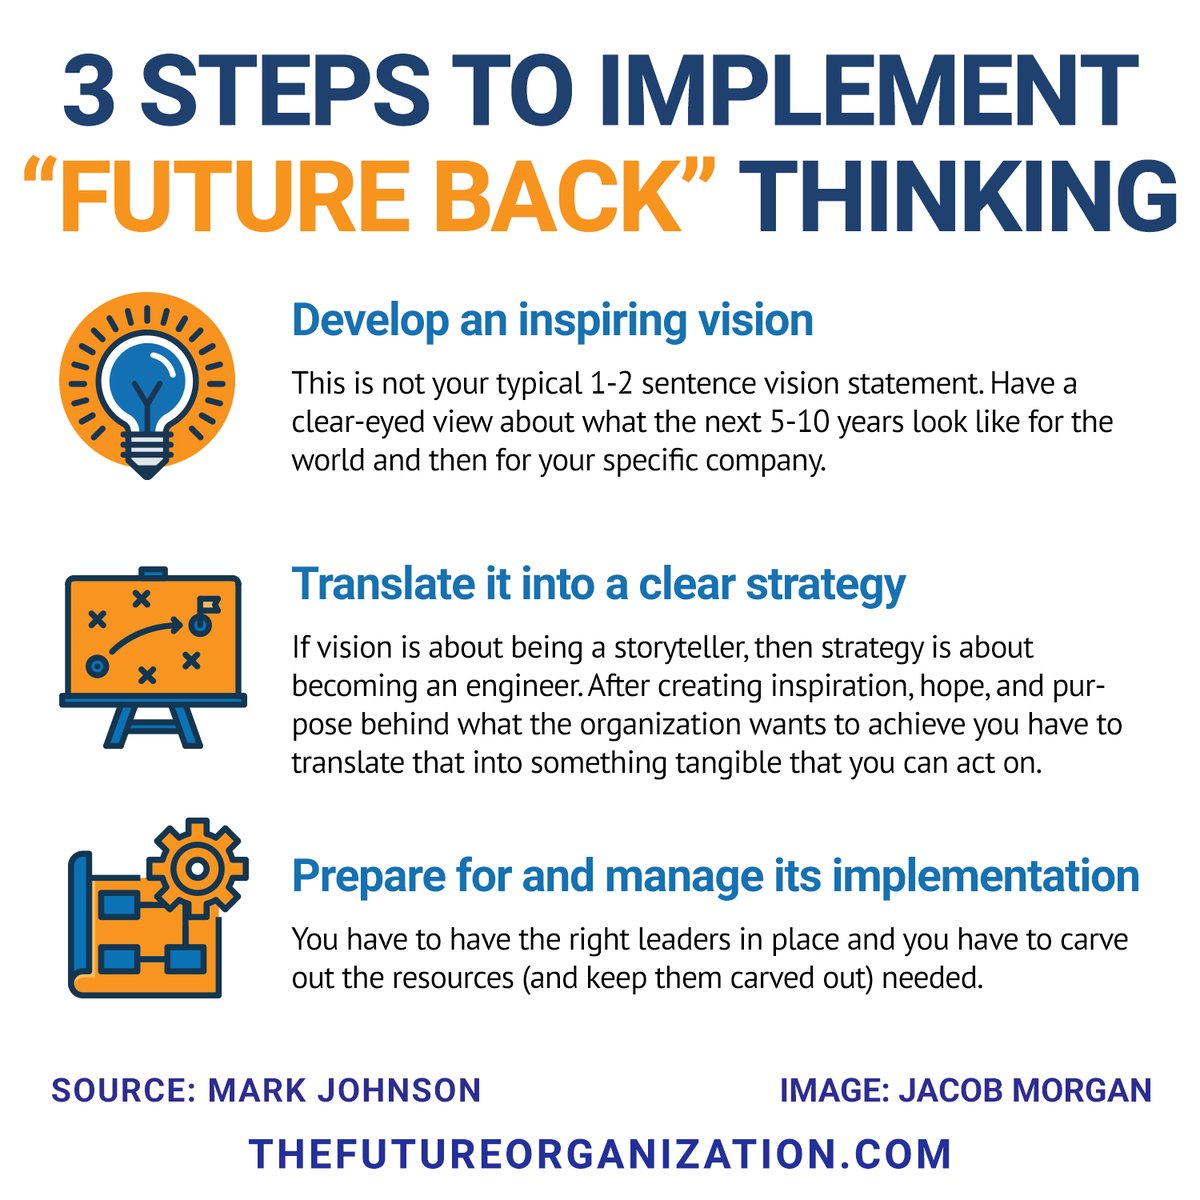 To stay ahead in today's fast-changing world, businesses must apply 'Future back' thinking. This can help companies plan for the future by imagining it first and then working backwards to reach their objectives. Here’s how to implement this:

#futureofwork #leadership #futureback